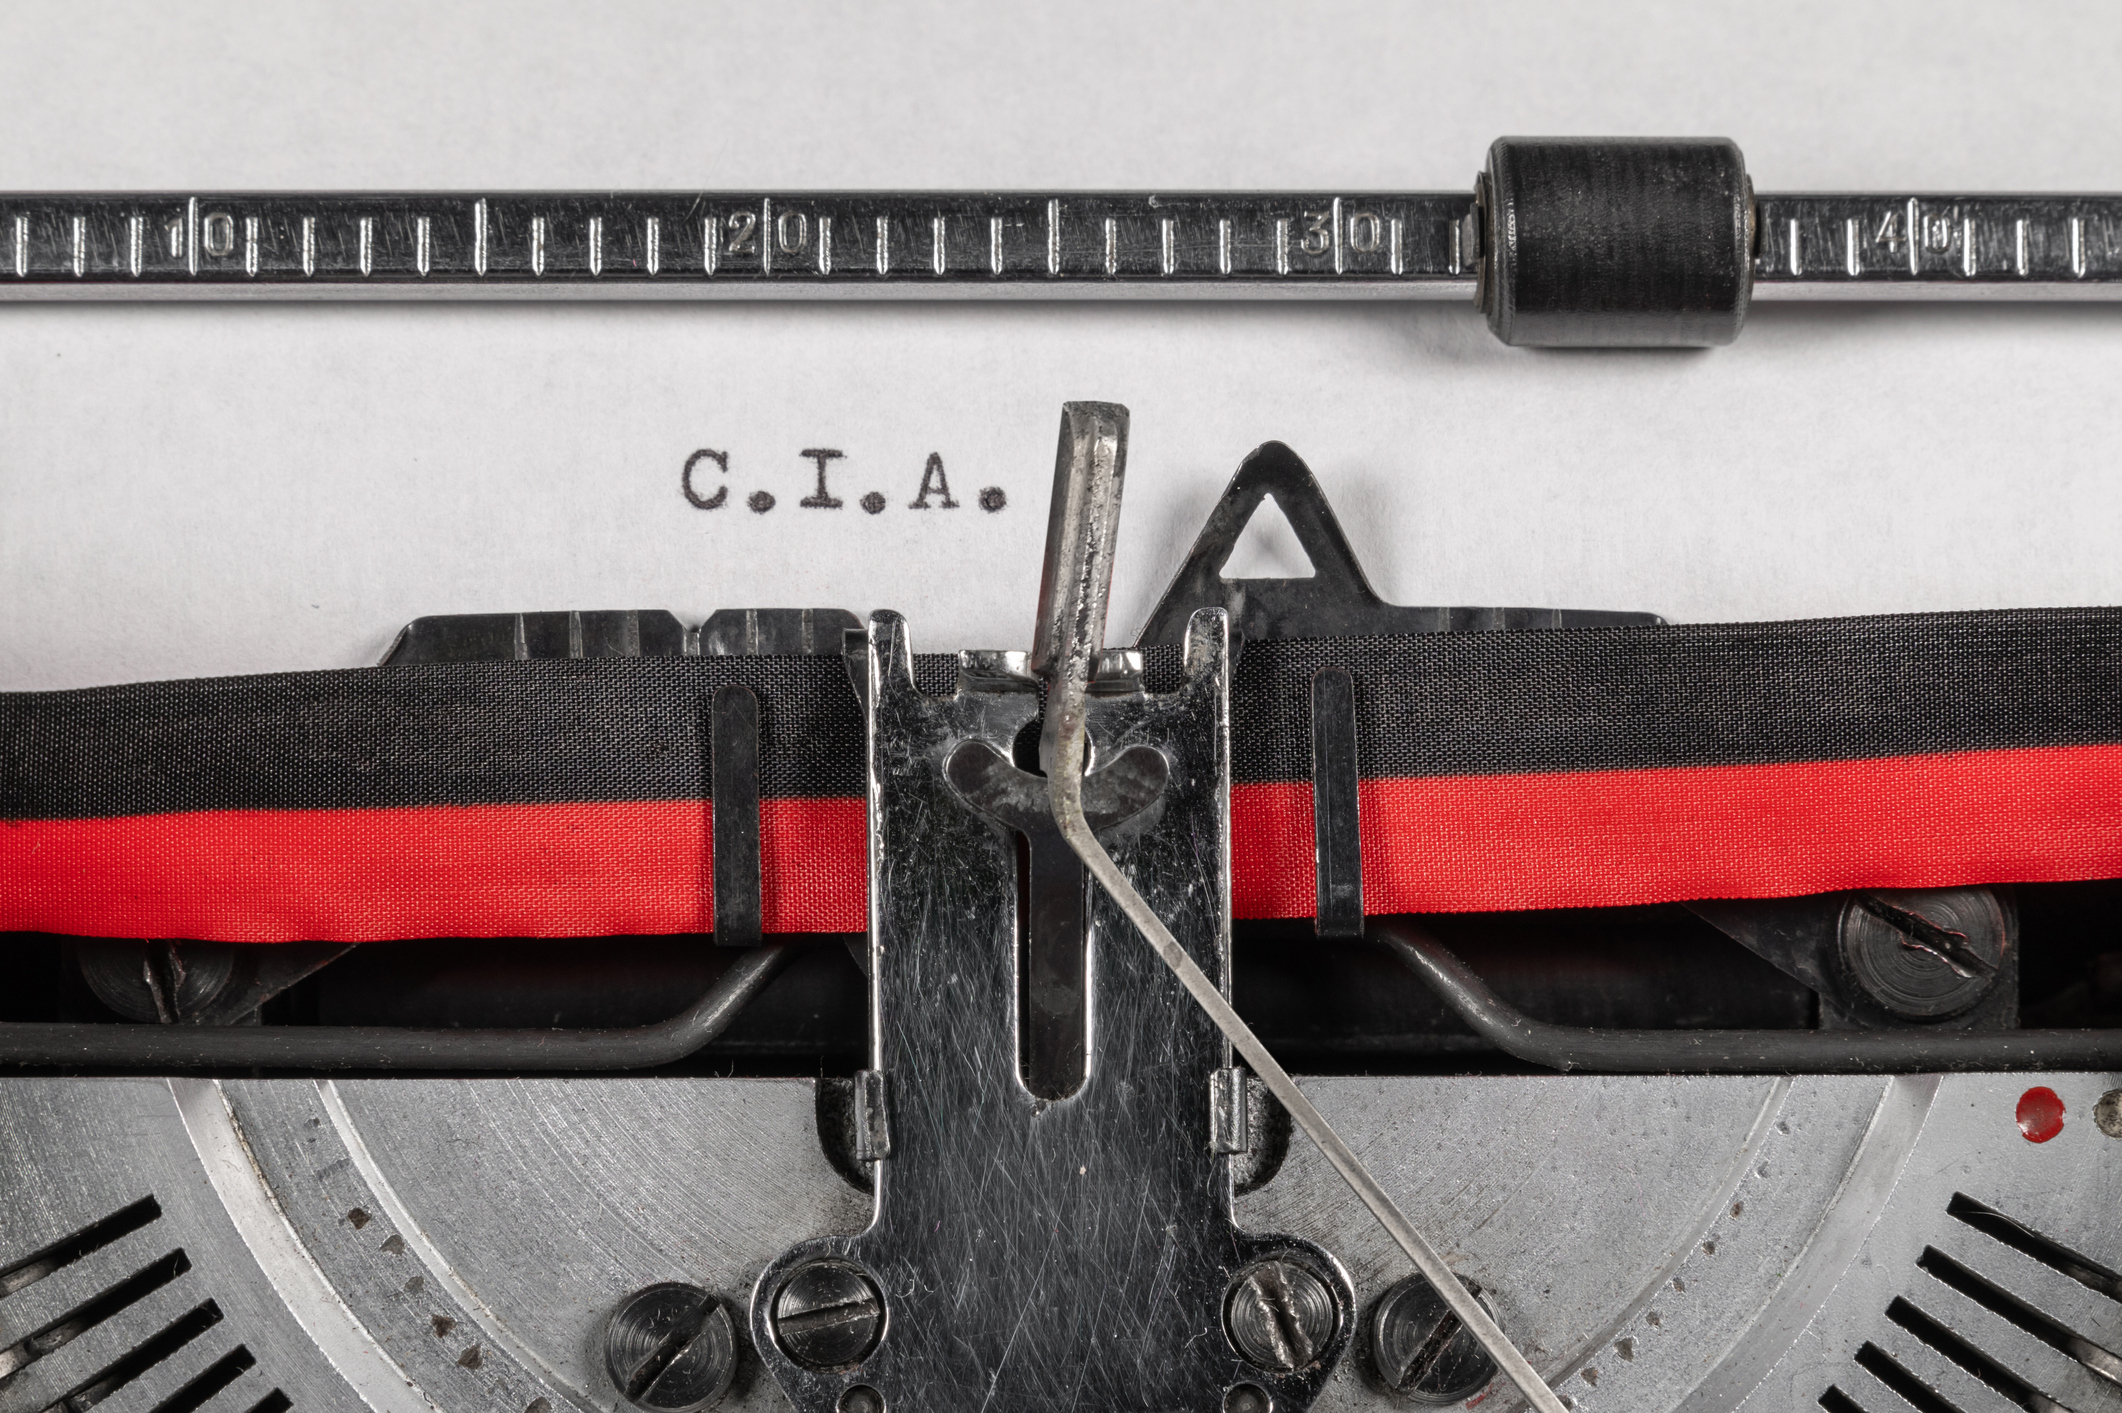 Typewriter with paper showing text &quot;C.i.A.&quot; as if in the process of typing